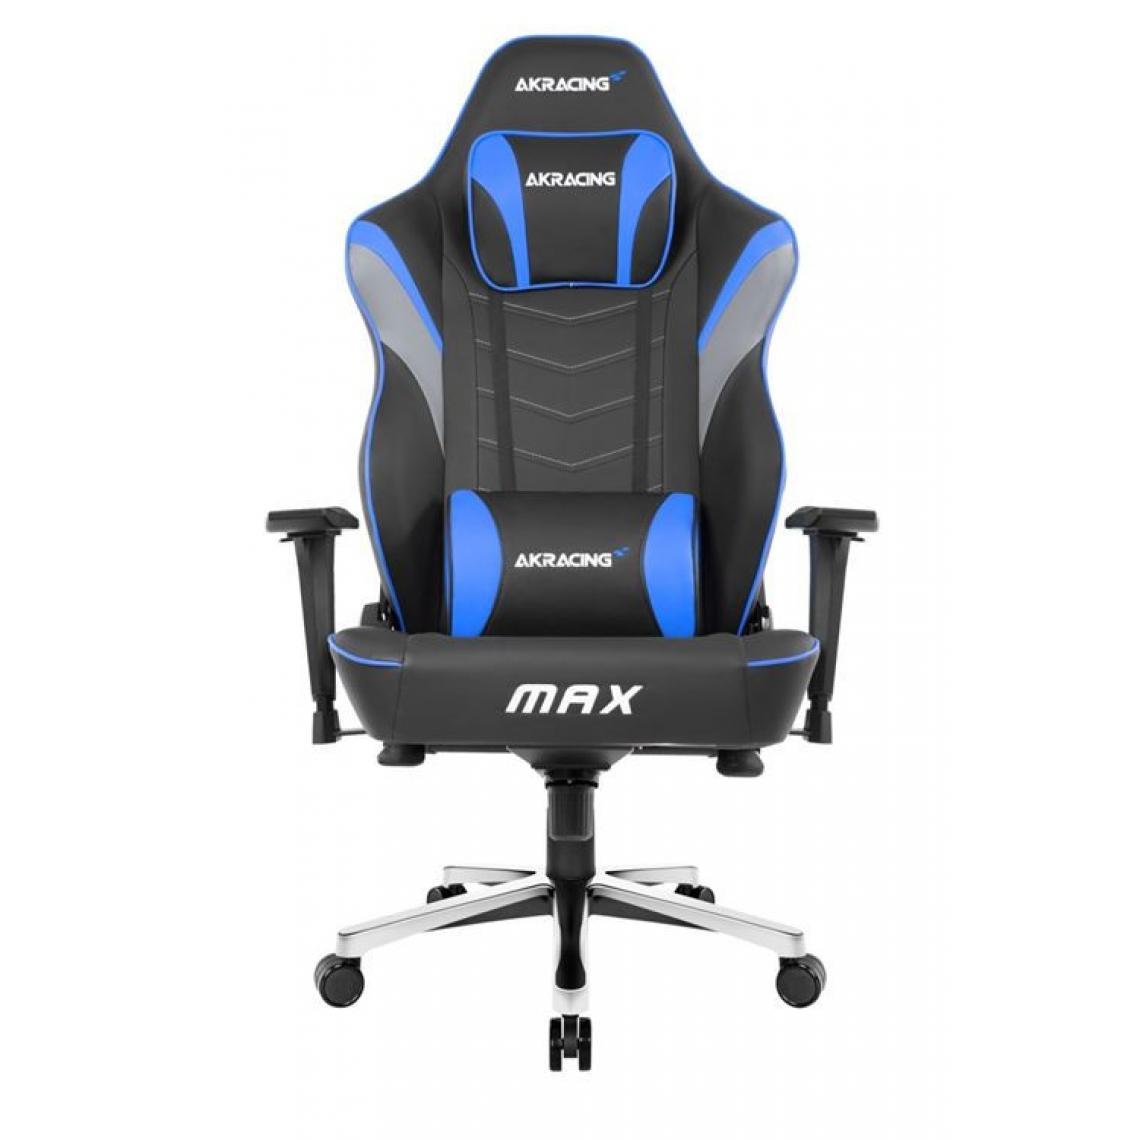 Akracing - Chaise Gaming AkRacing Série Masters Max Noir et bleu - Chaise gamer